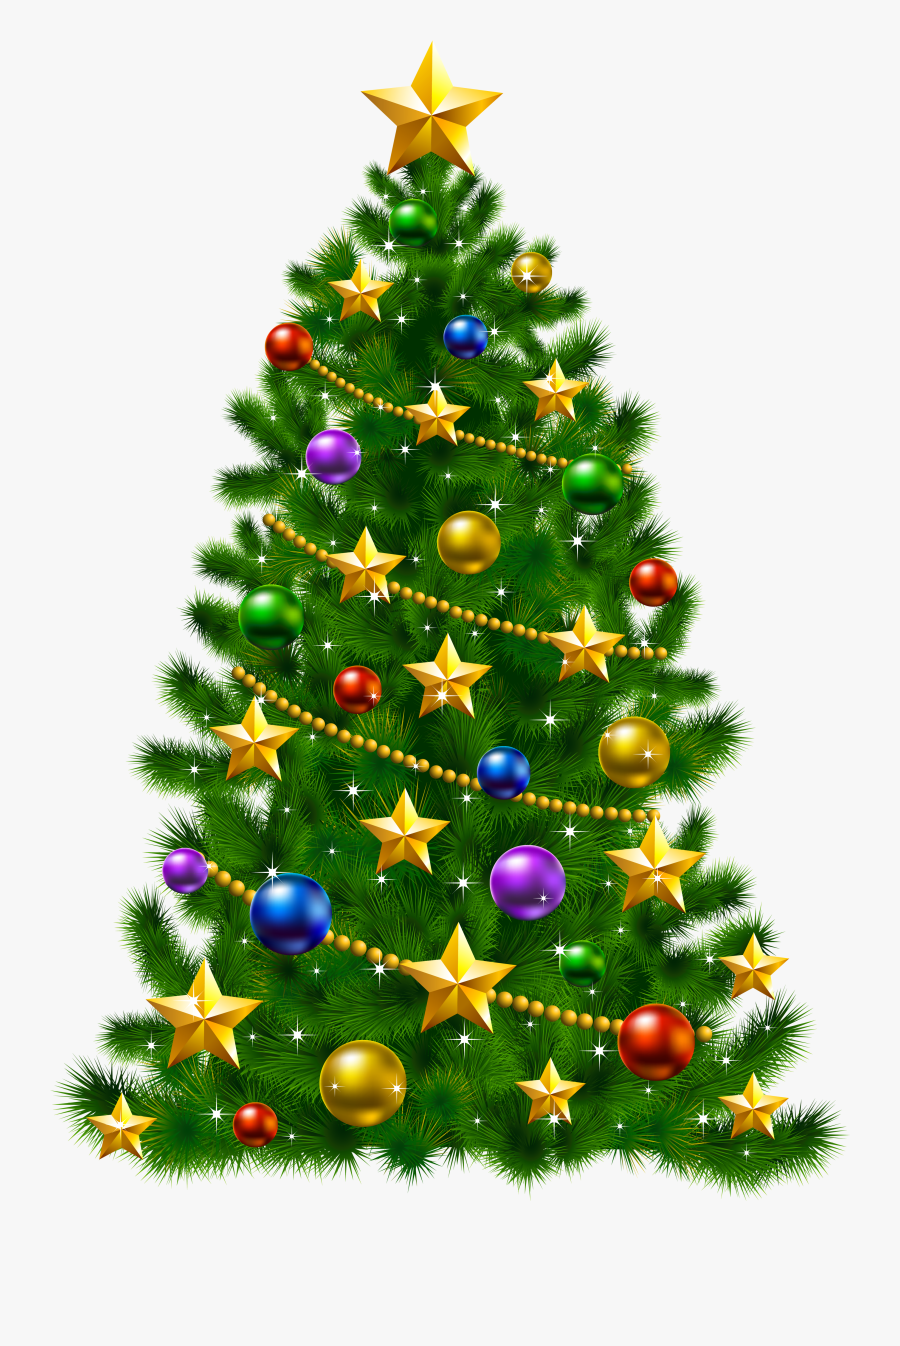 Star Cliparts Png Christmas Tree - Christmas Tree With Stars, Transparent Clipart